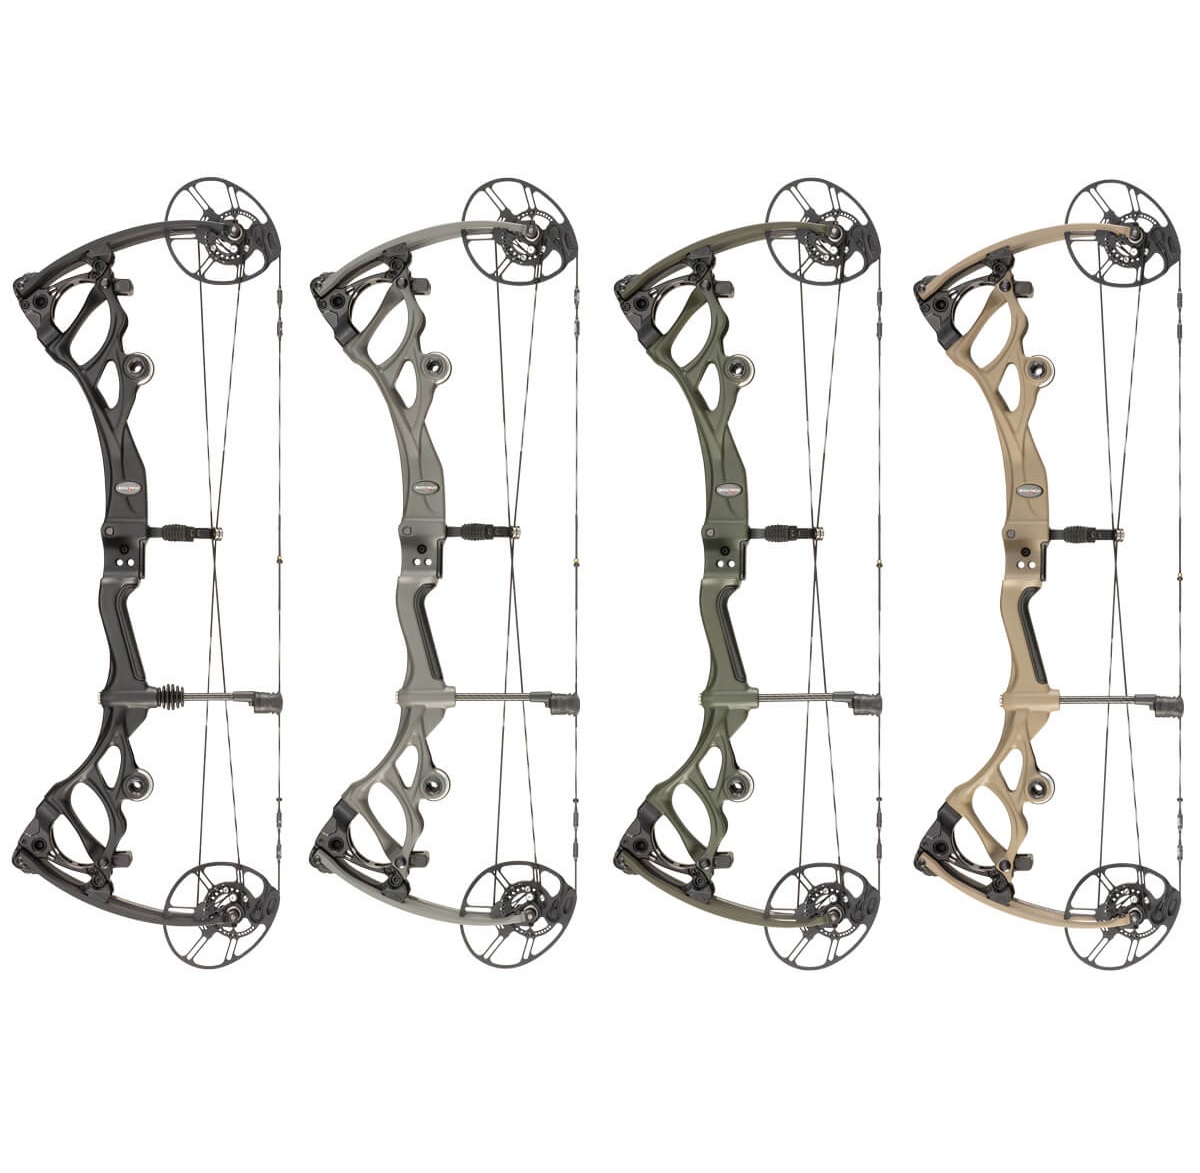 Bowtech SS34 Compound Bow Oz Hunting & Bows